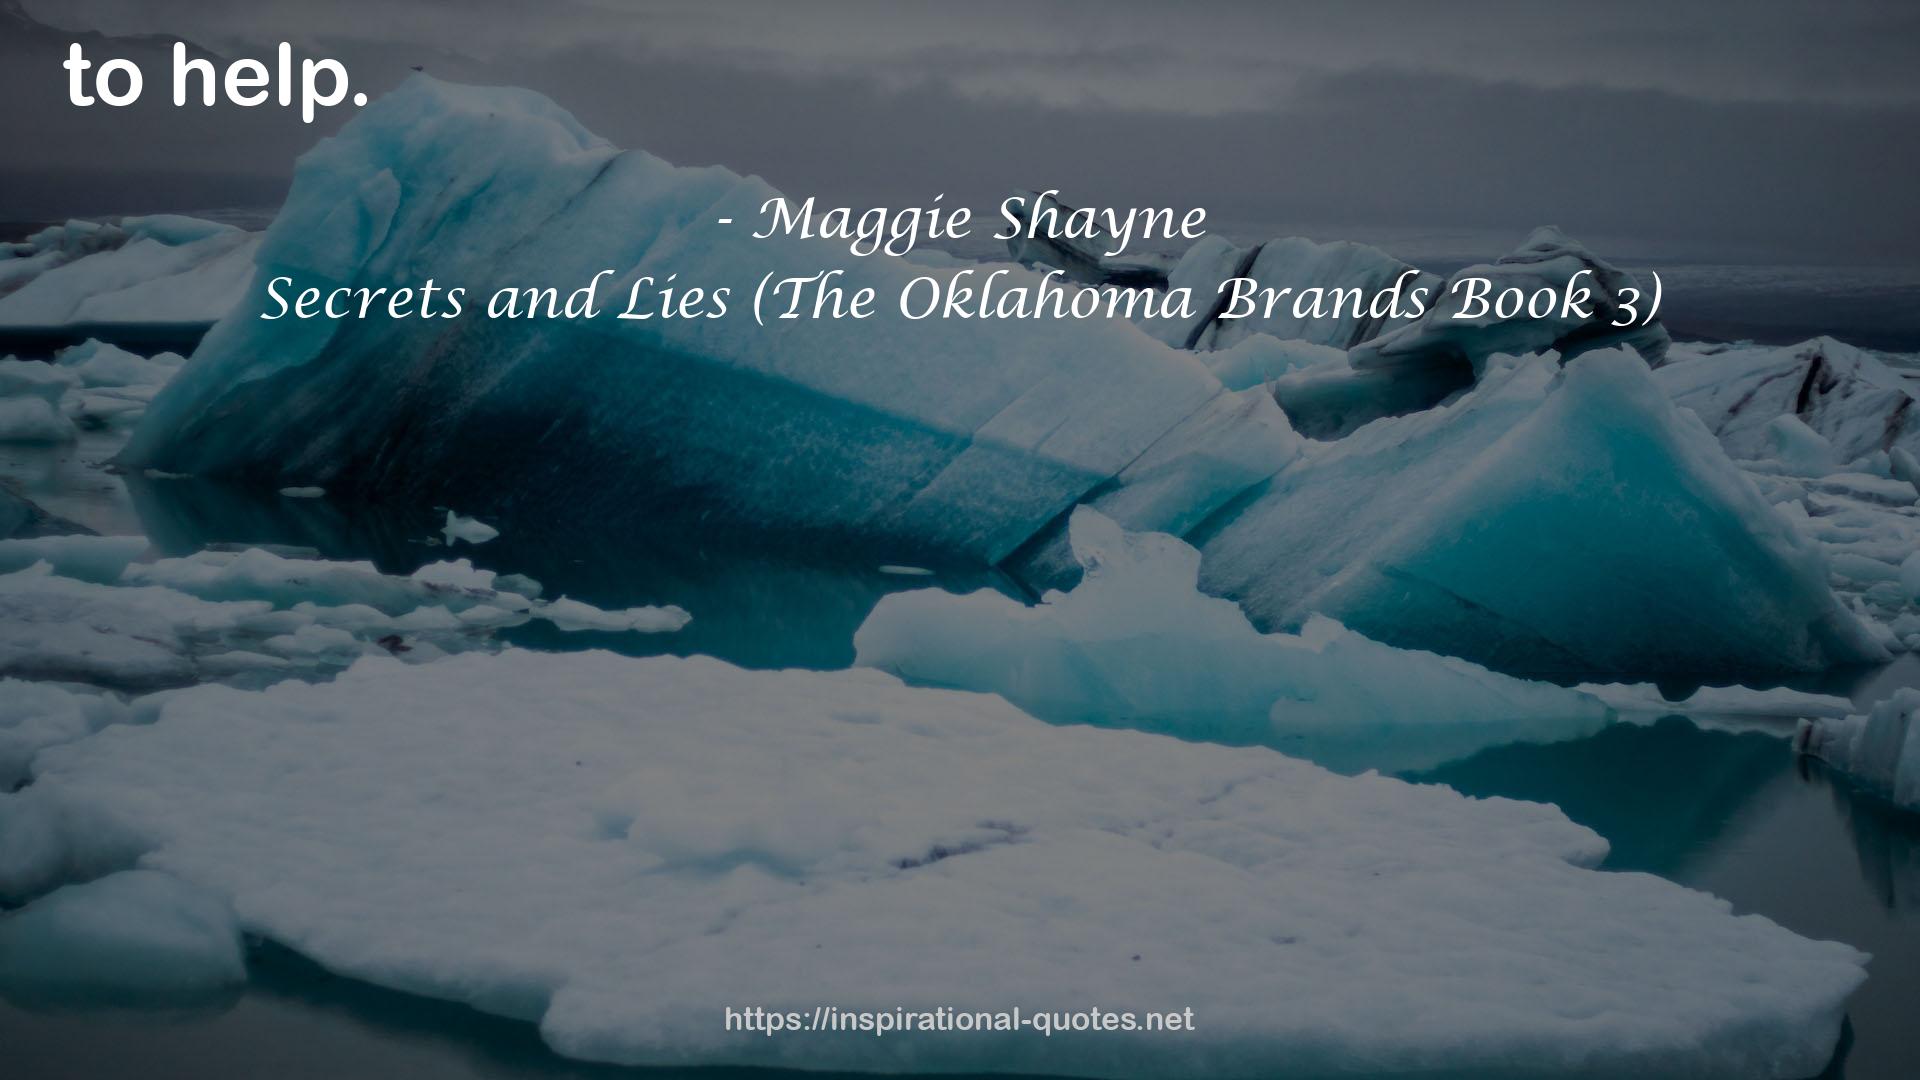 Secrets and Lies (The Oklahoma Brands Book 3) QUOTES